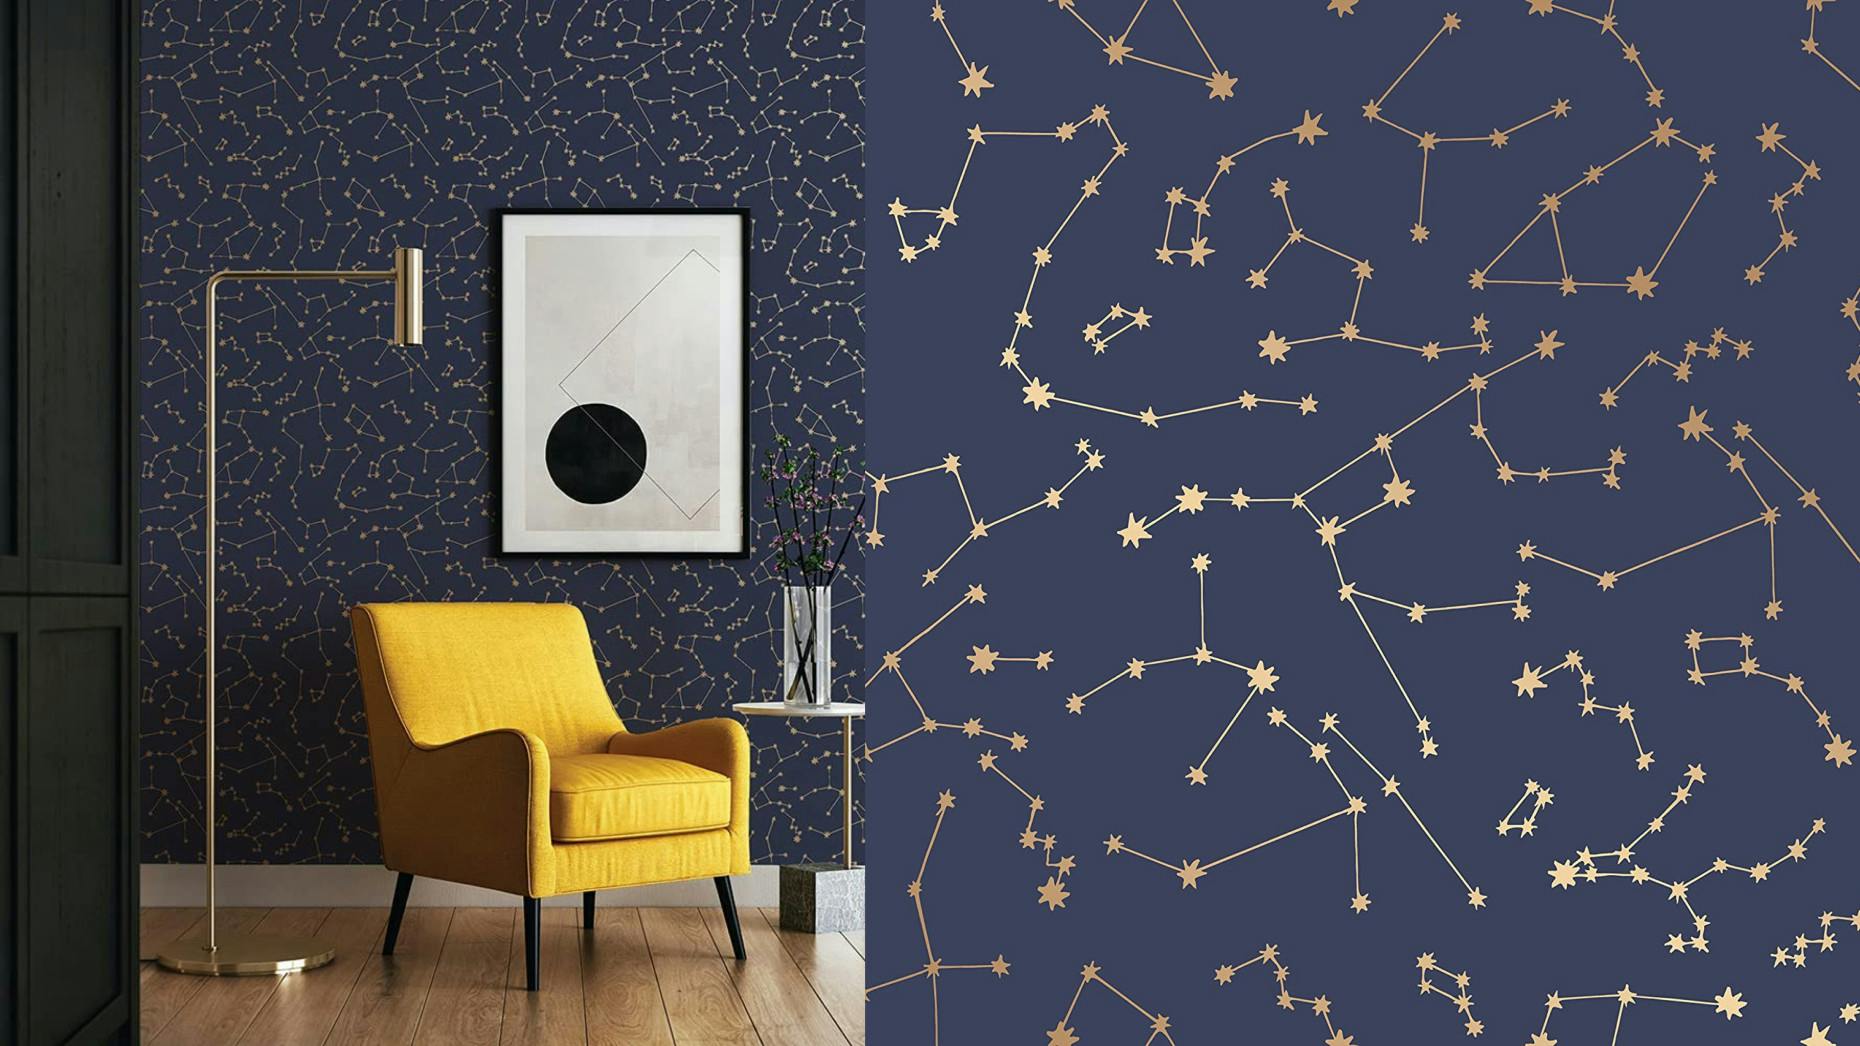 Constellation-themed removable wallpaper